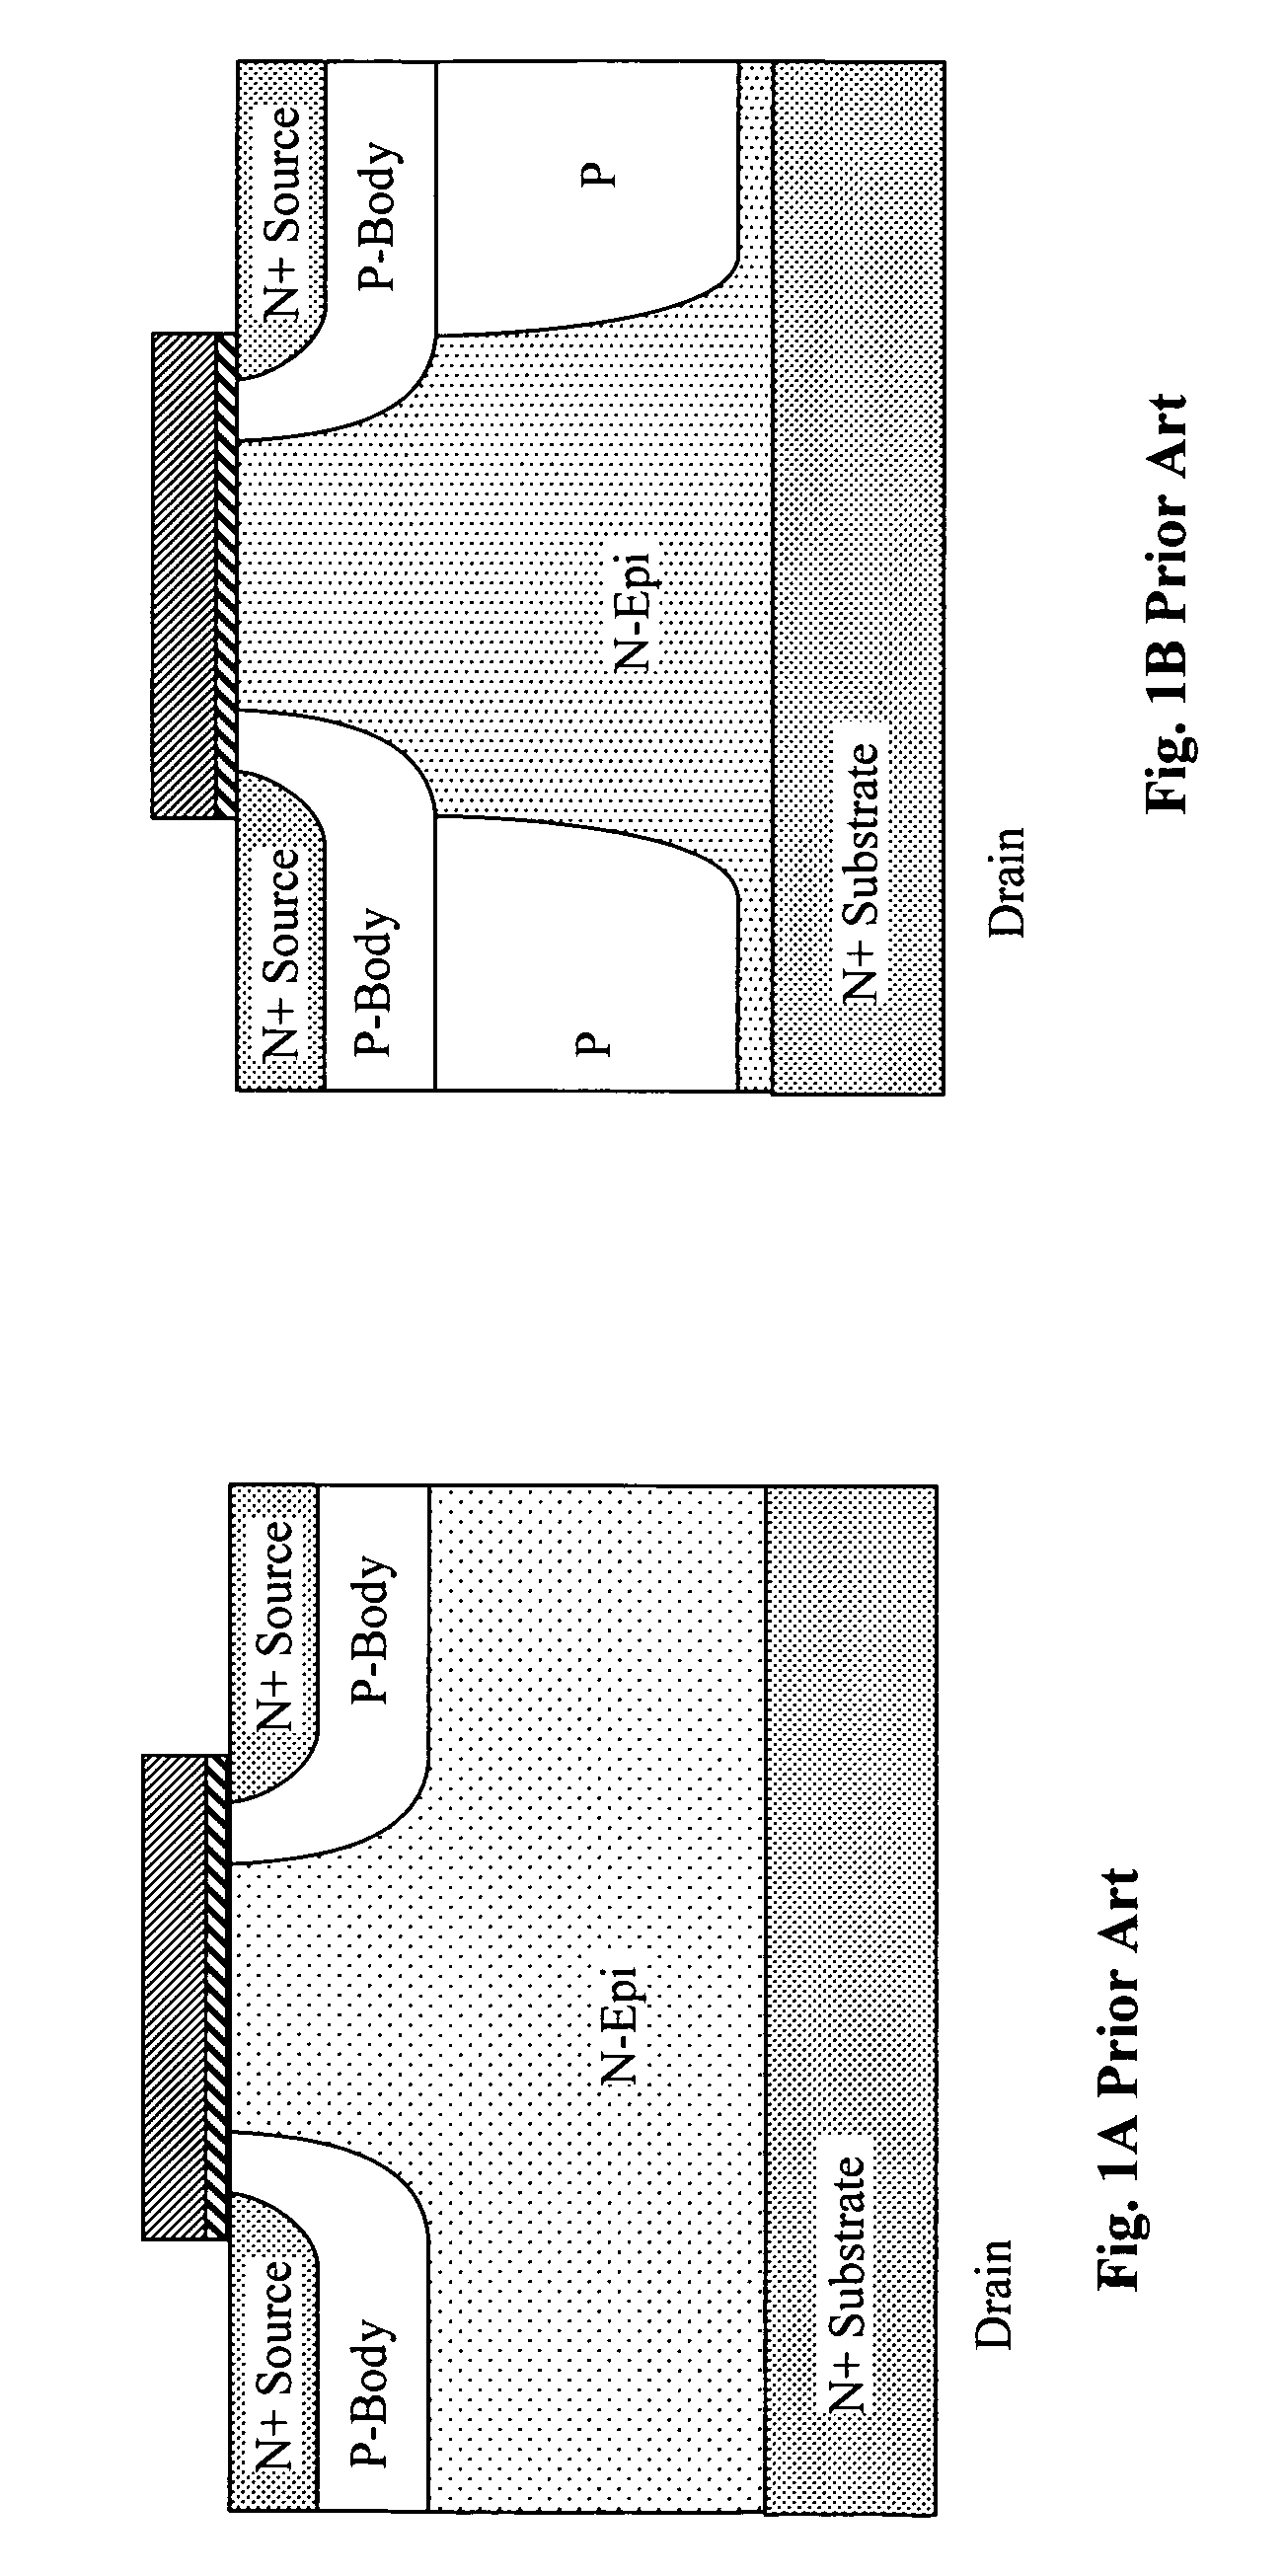 Nano-tube MOSFET technology and devices